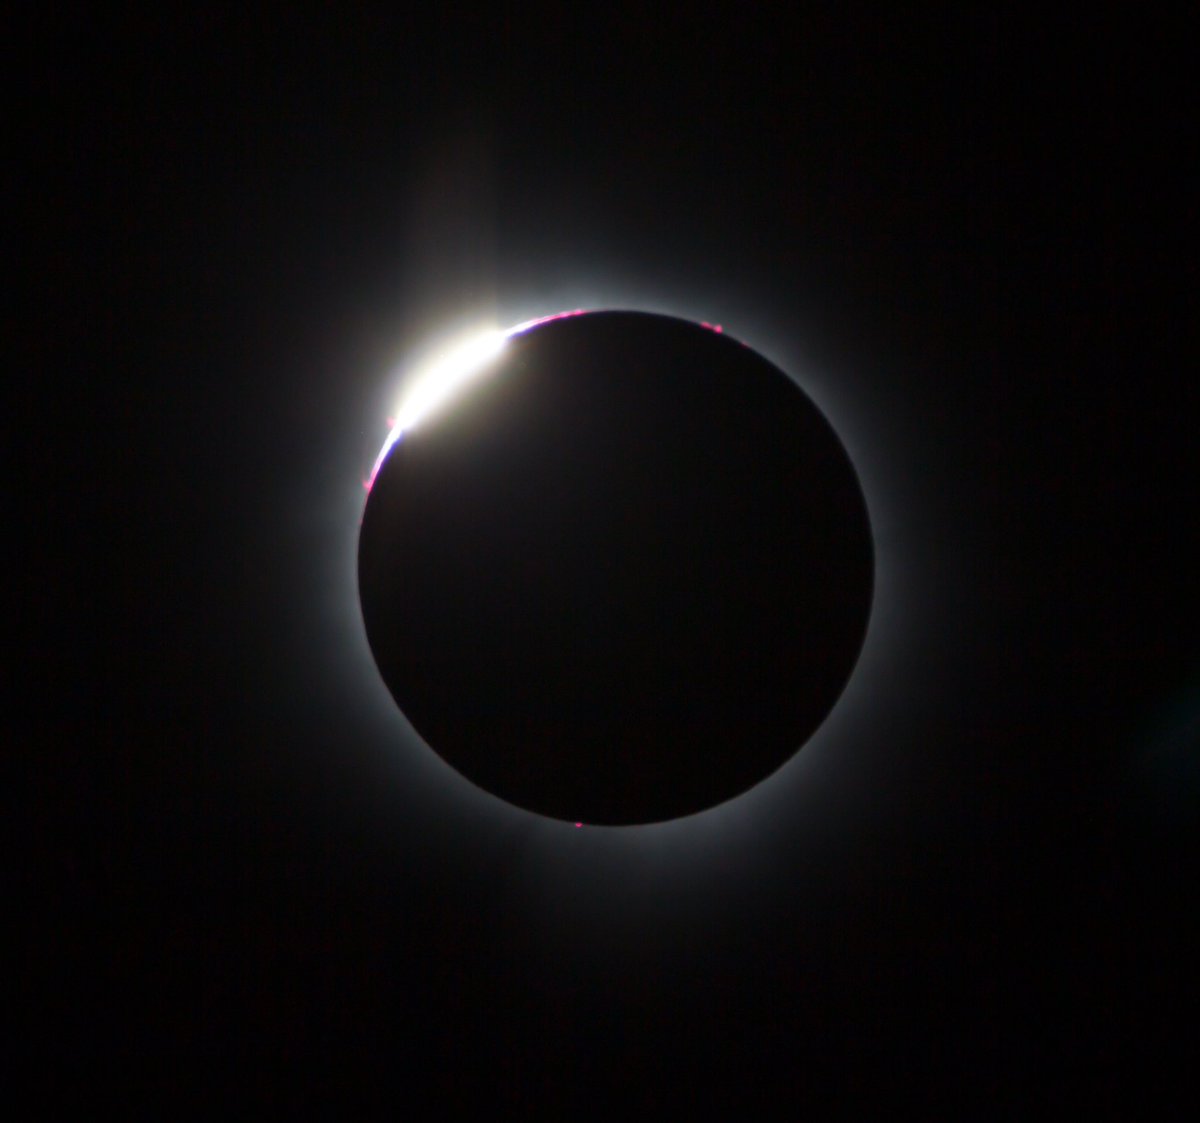 Just realized there’s another one or two eclipse photos I never shared! Here is my image of the iconic Diamond Ring, taken just seconds before totality! 📸: Me for @WeAreSpaceScout